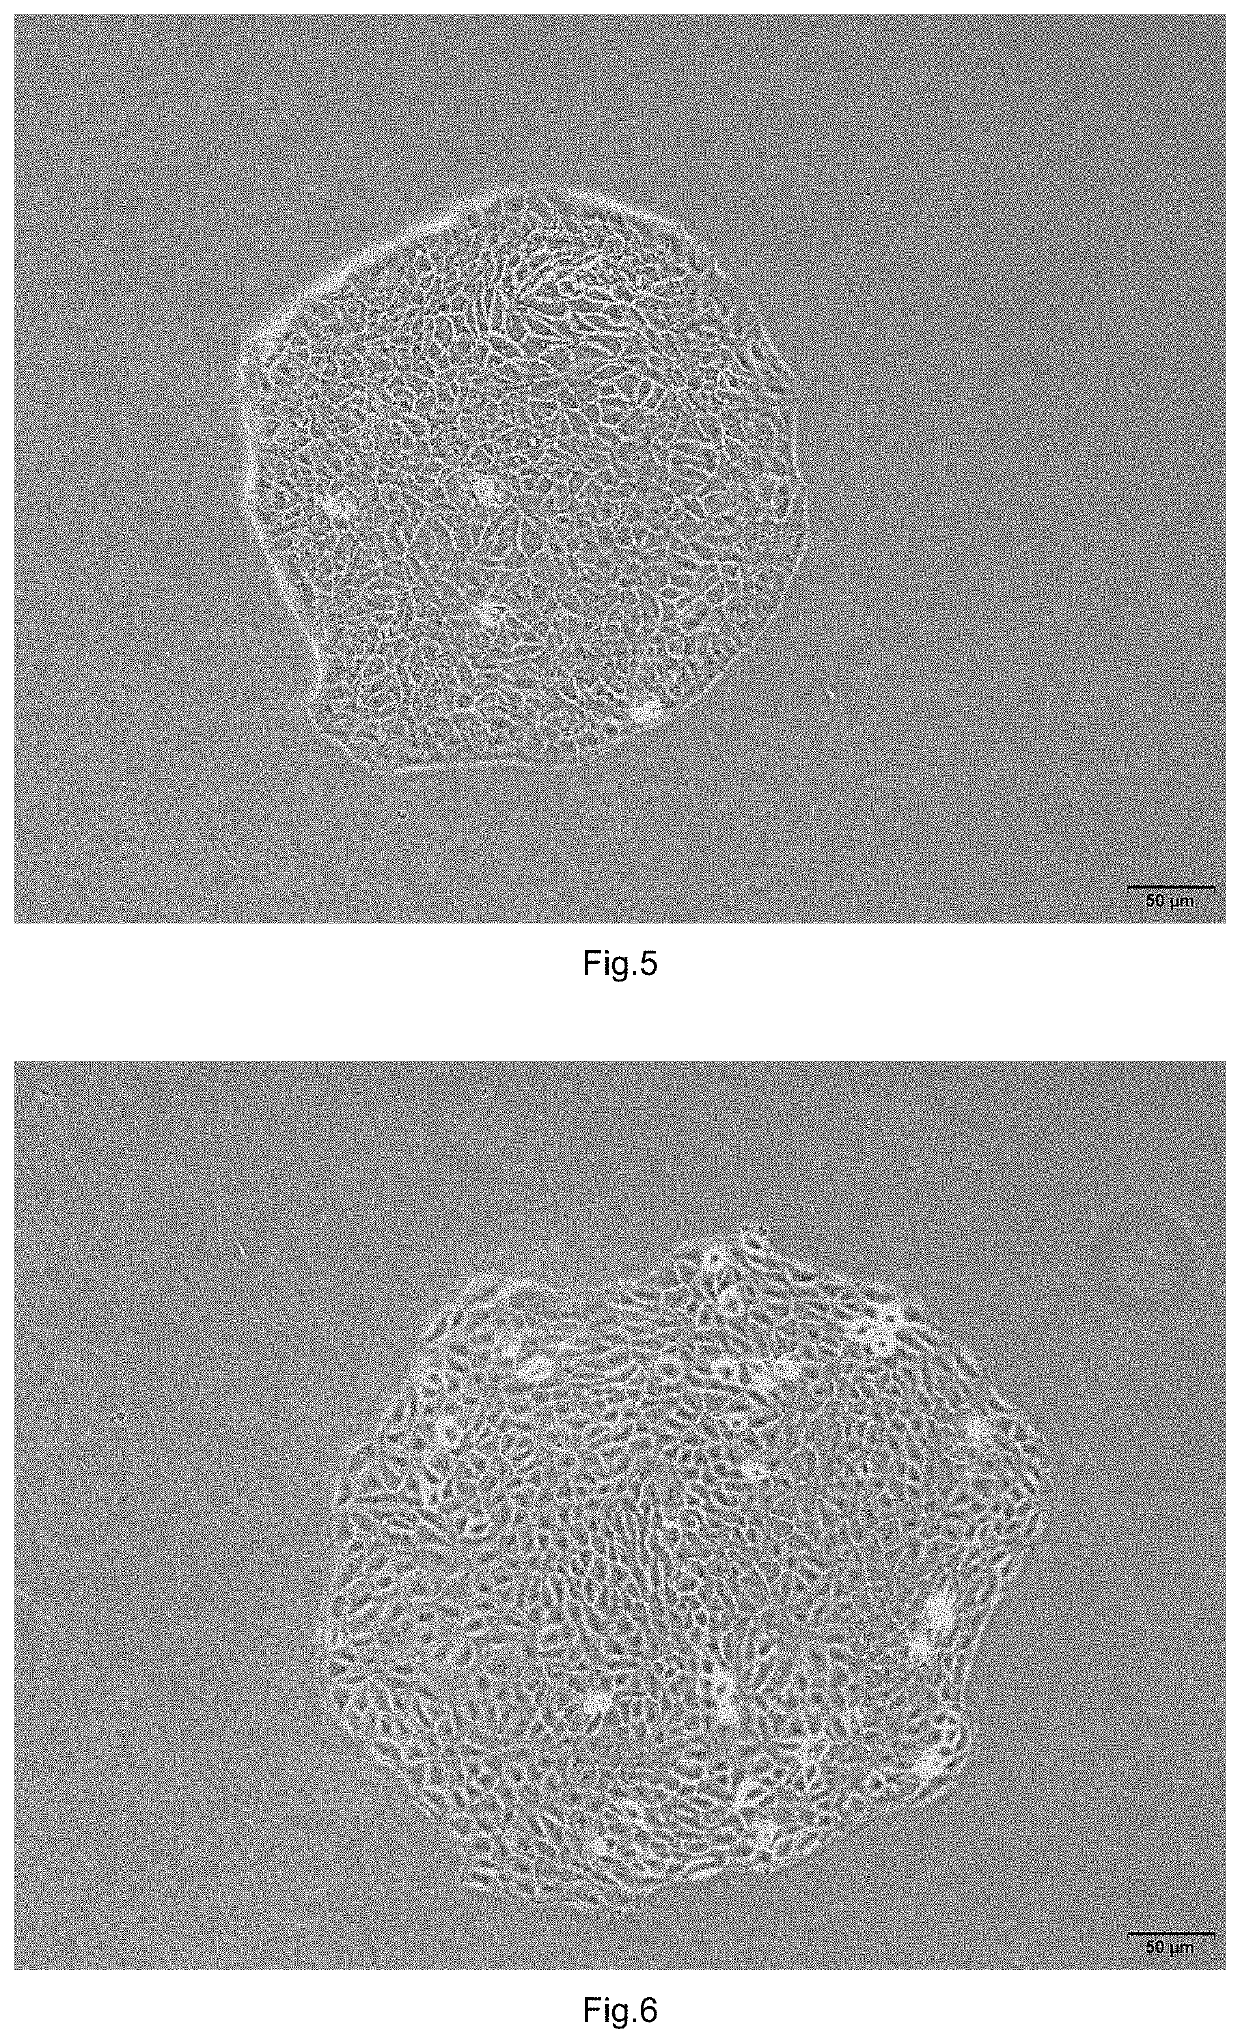 A Cell Model For In Vitro Evaluation Of Compound-Induced Skin Sensitization And A Constructing Method Therefor